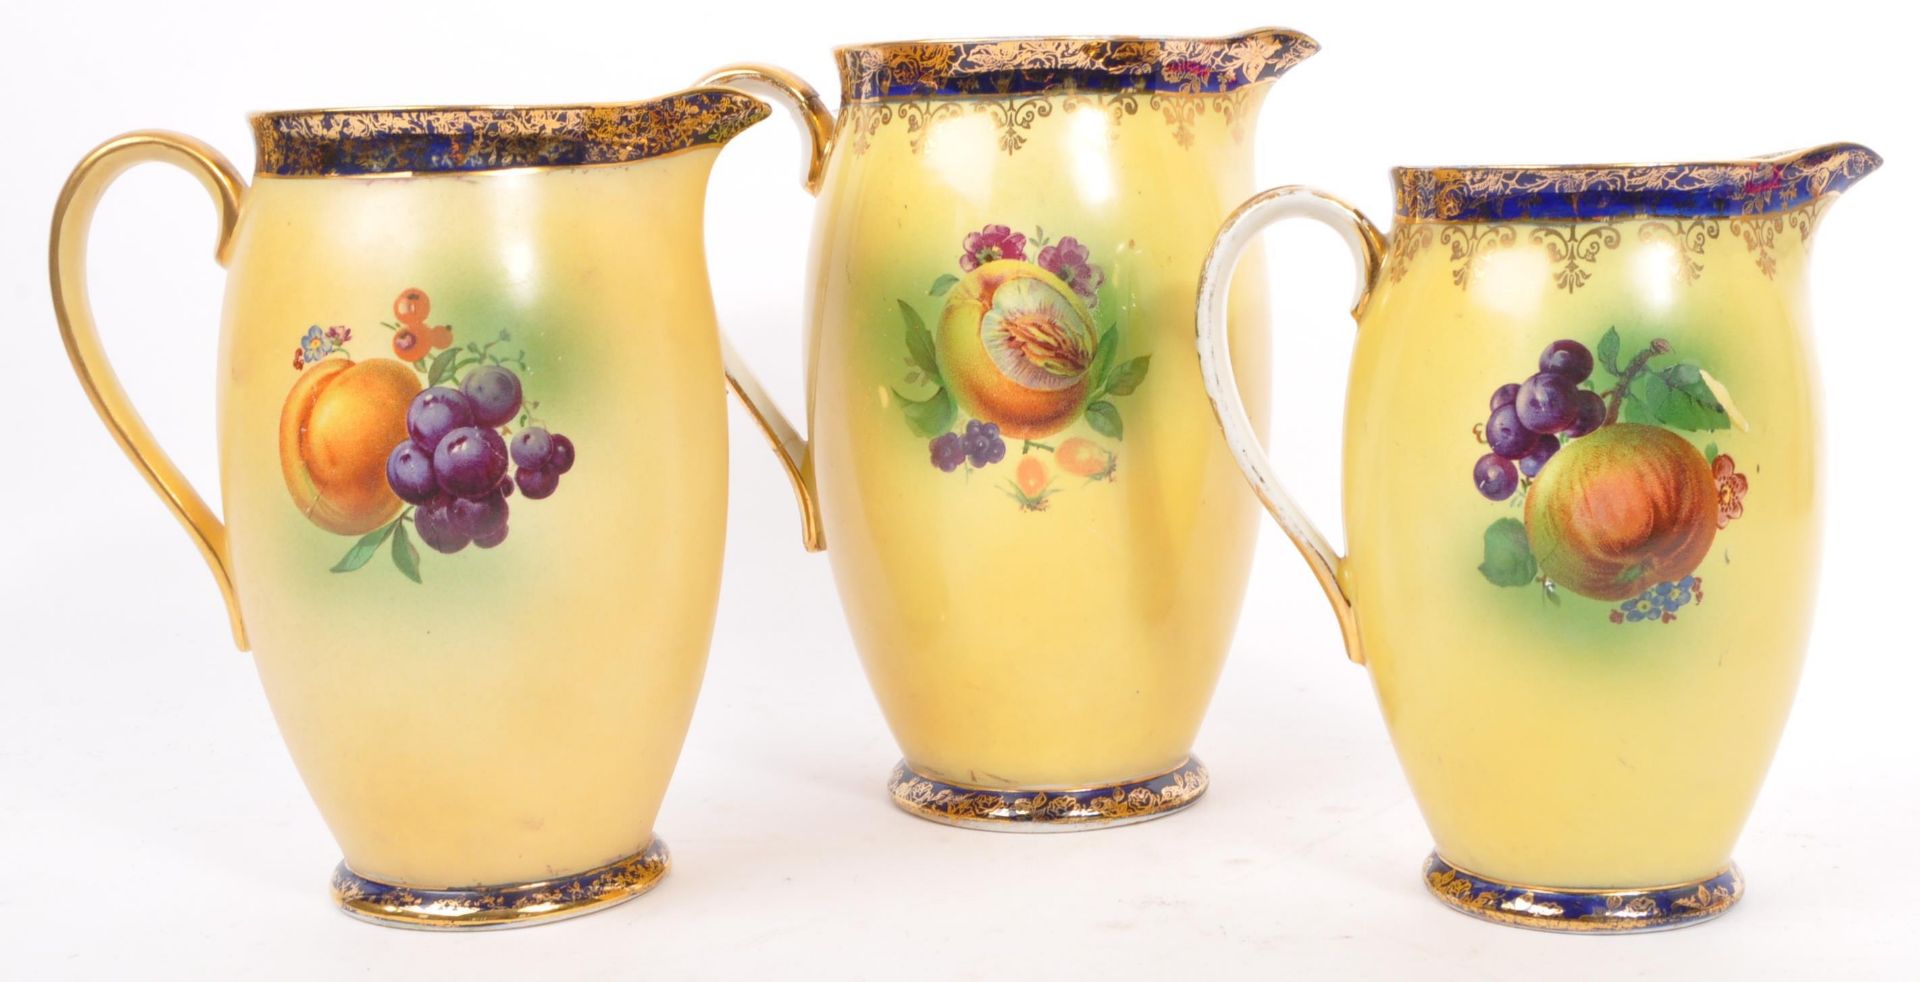 COLLECTION OF THREE EARLY 20TH CENTURY CERAMIC POTTERY JUGS - Image 3 of 6